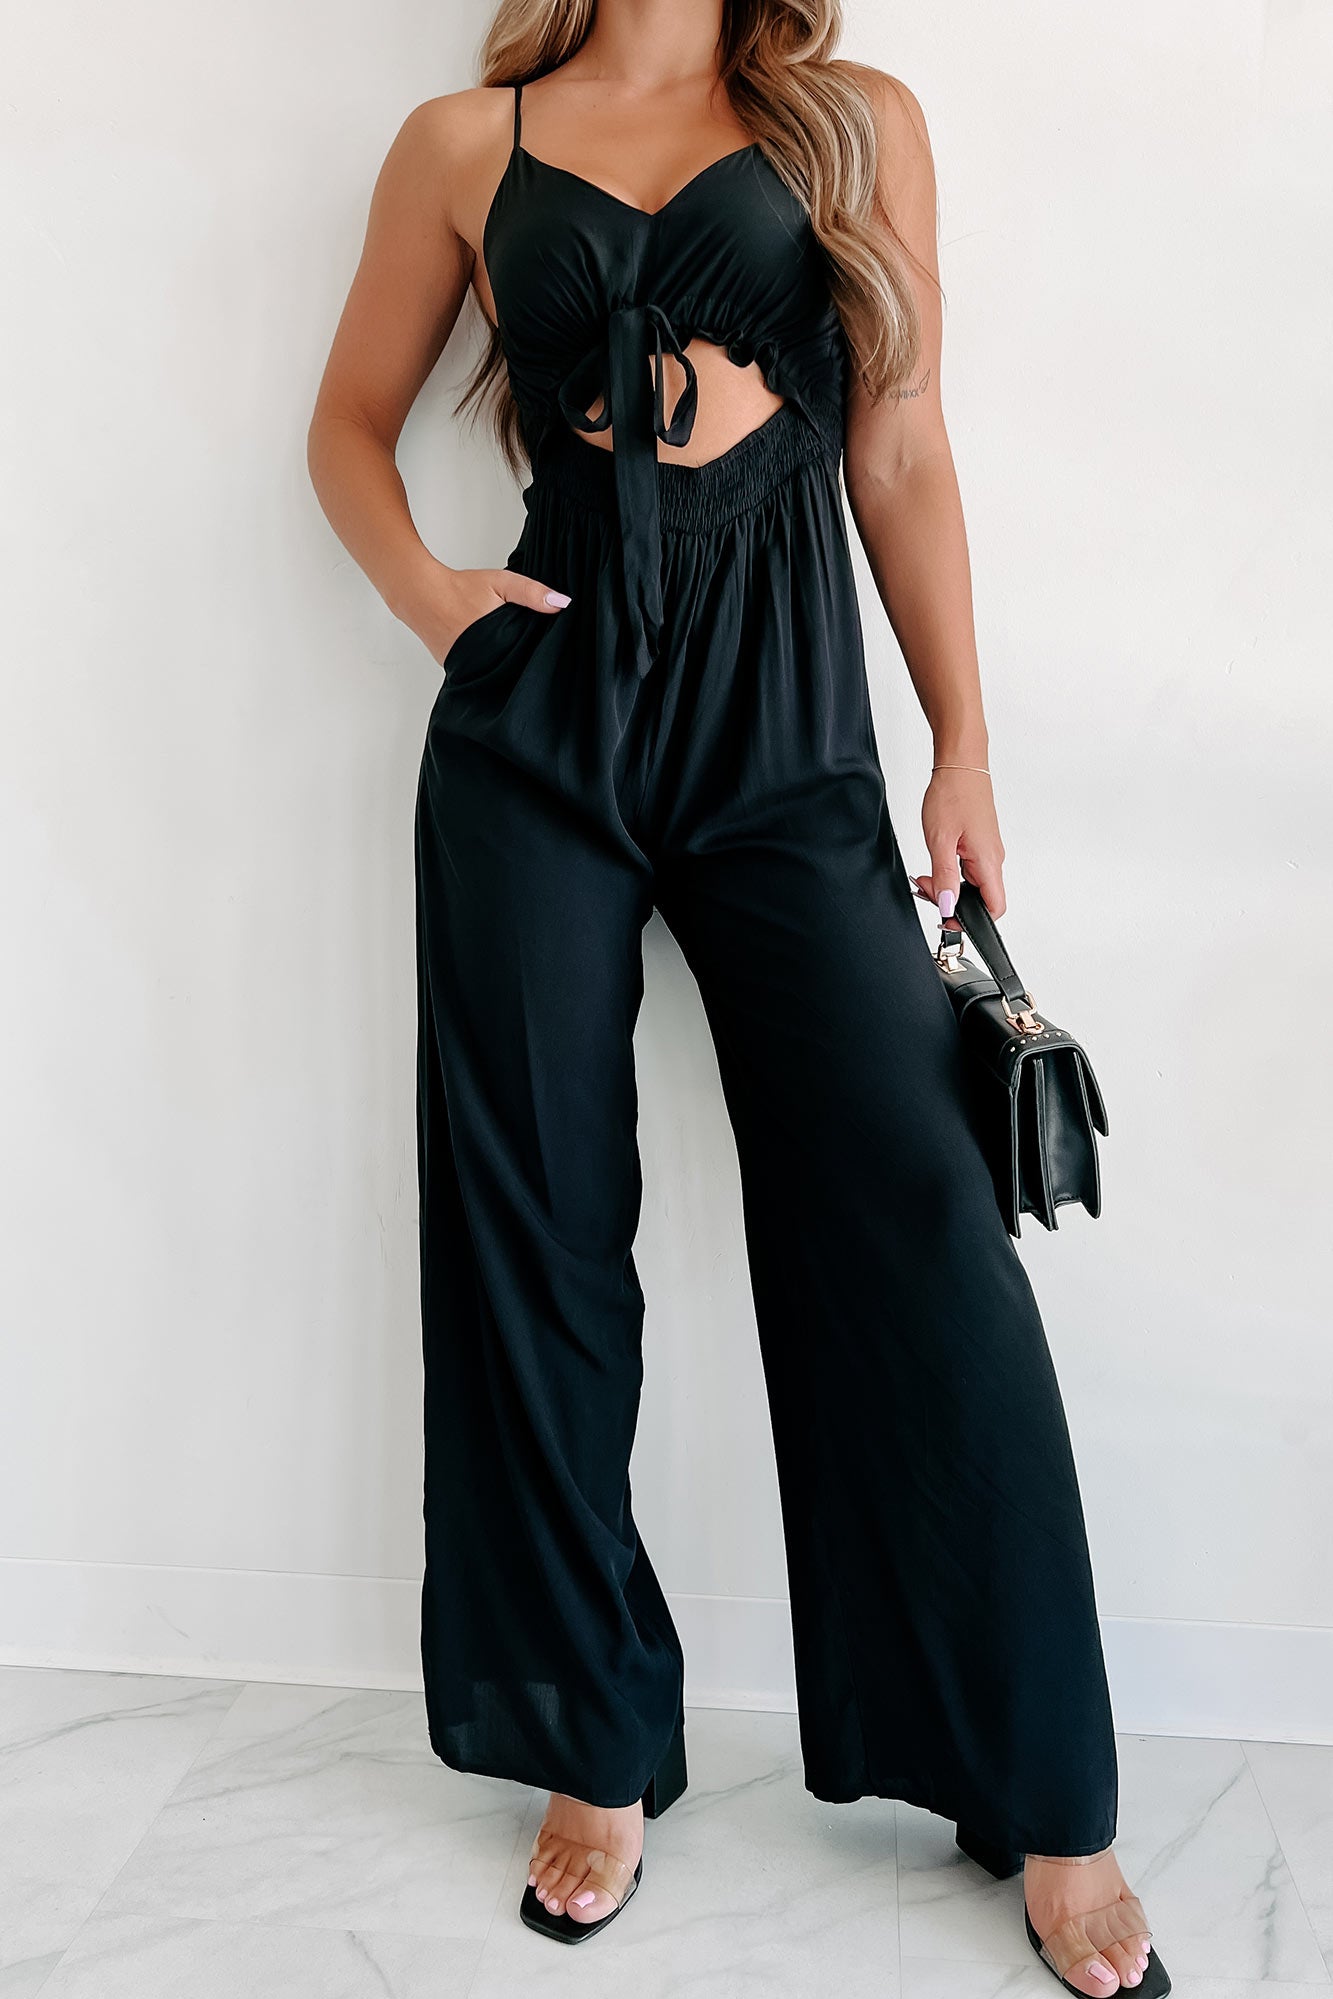 Staying In The Sun Cut-Out Jumpsuit (Black) - NanaMacs